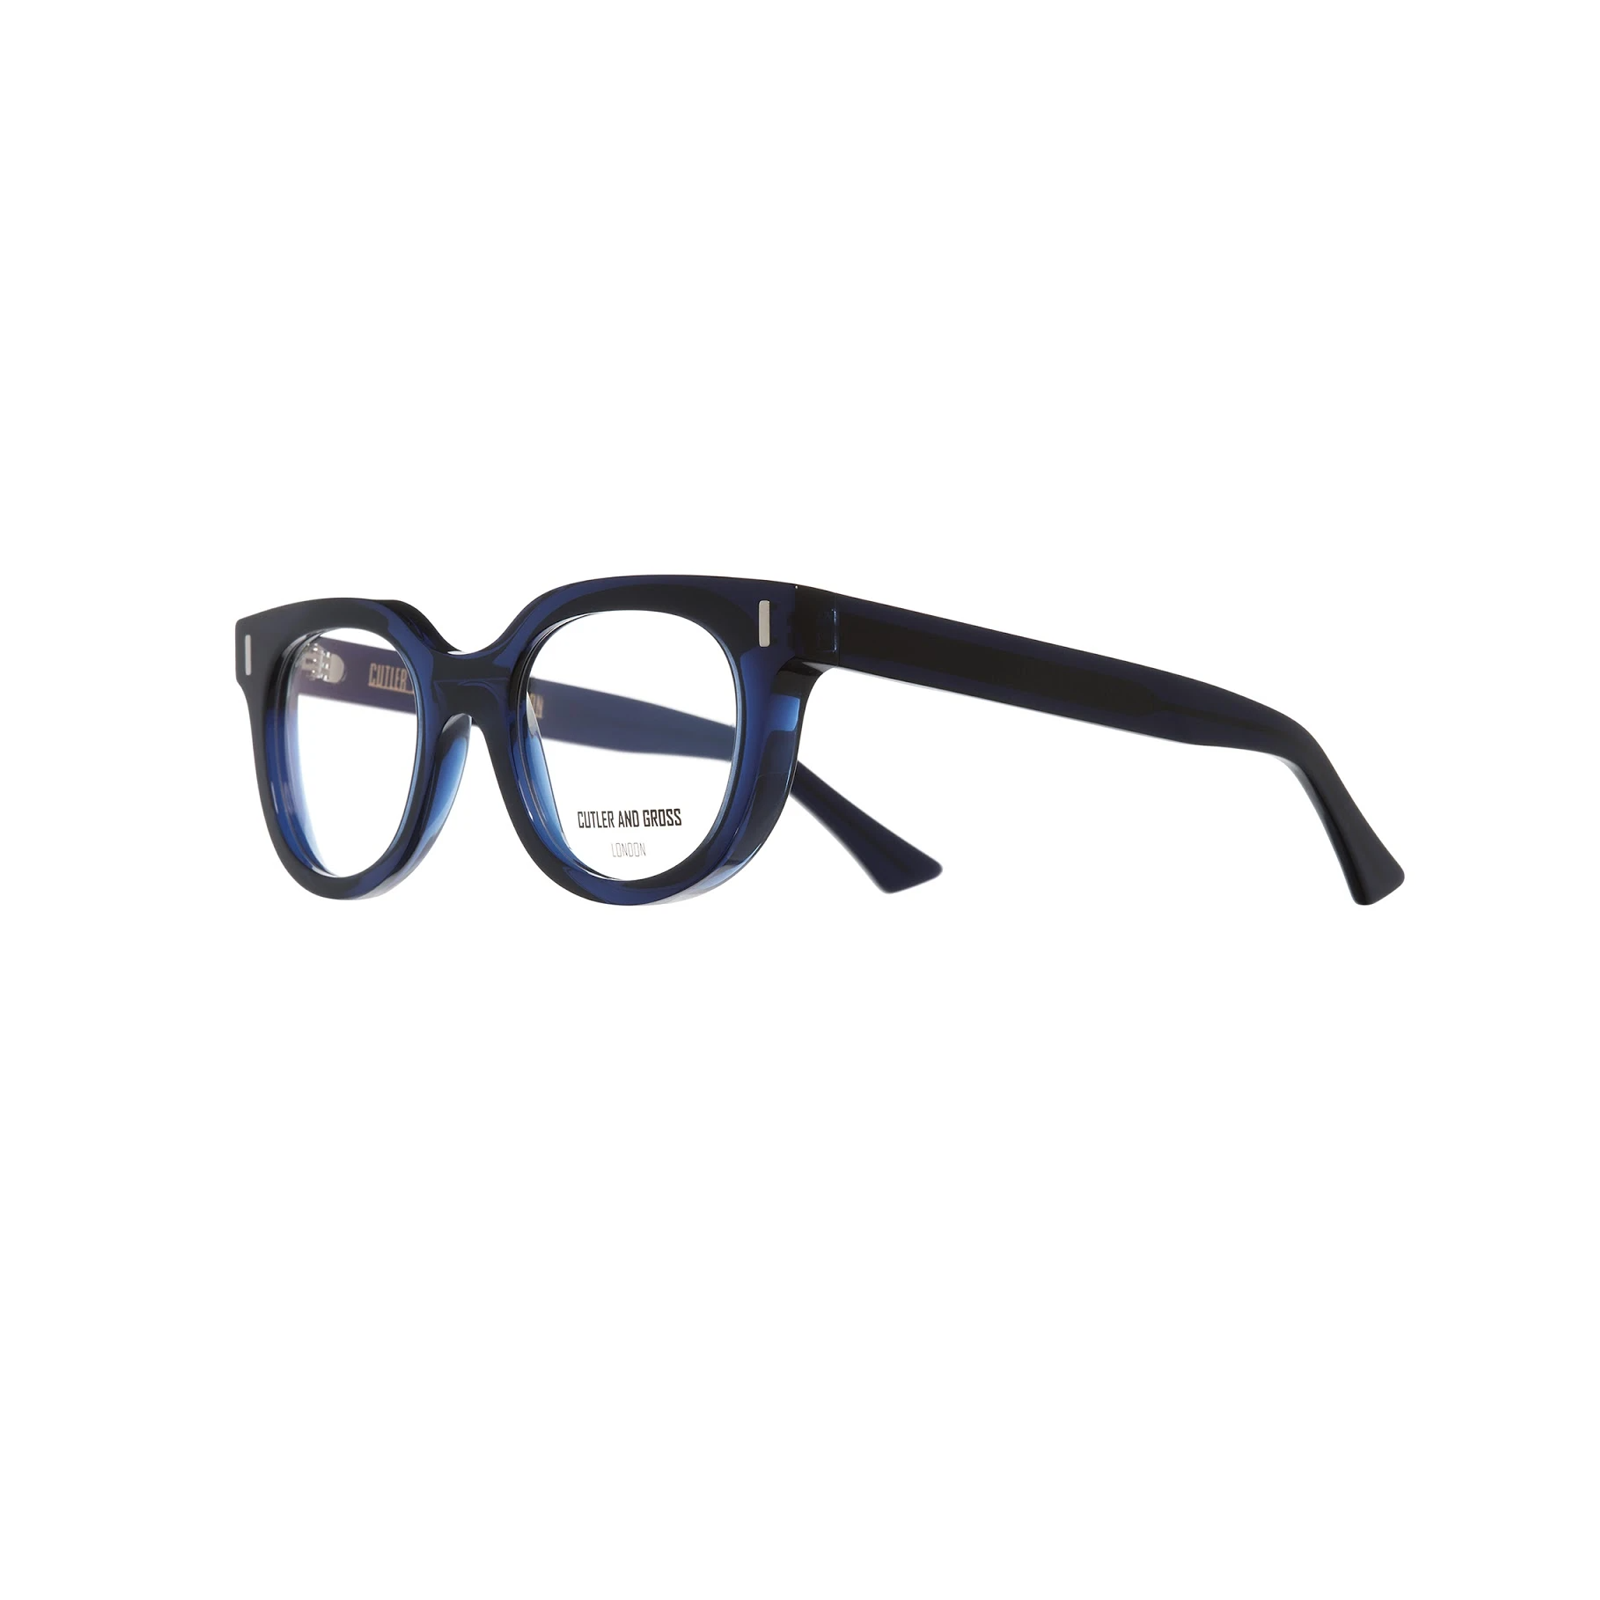 Cutler and Gross, 1304 Optical Round Glasses - Classic Navy